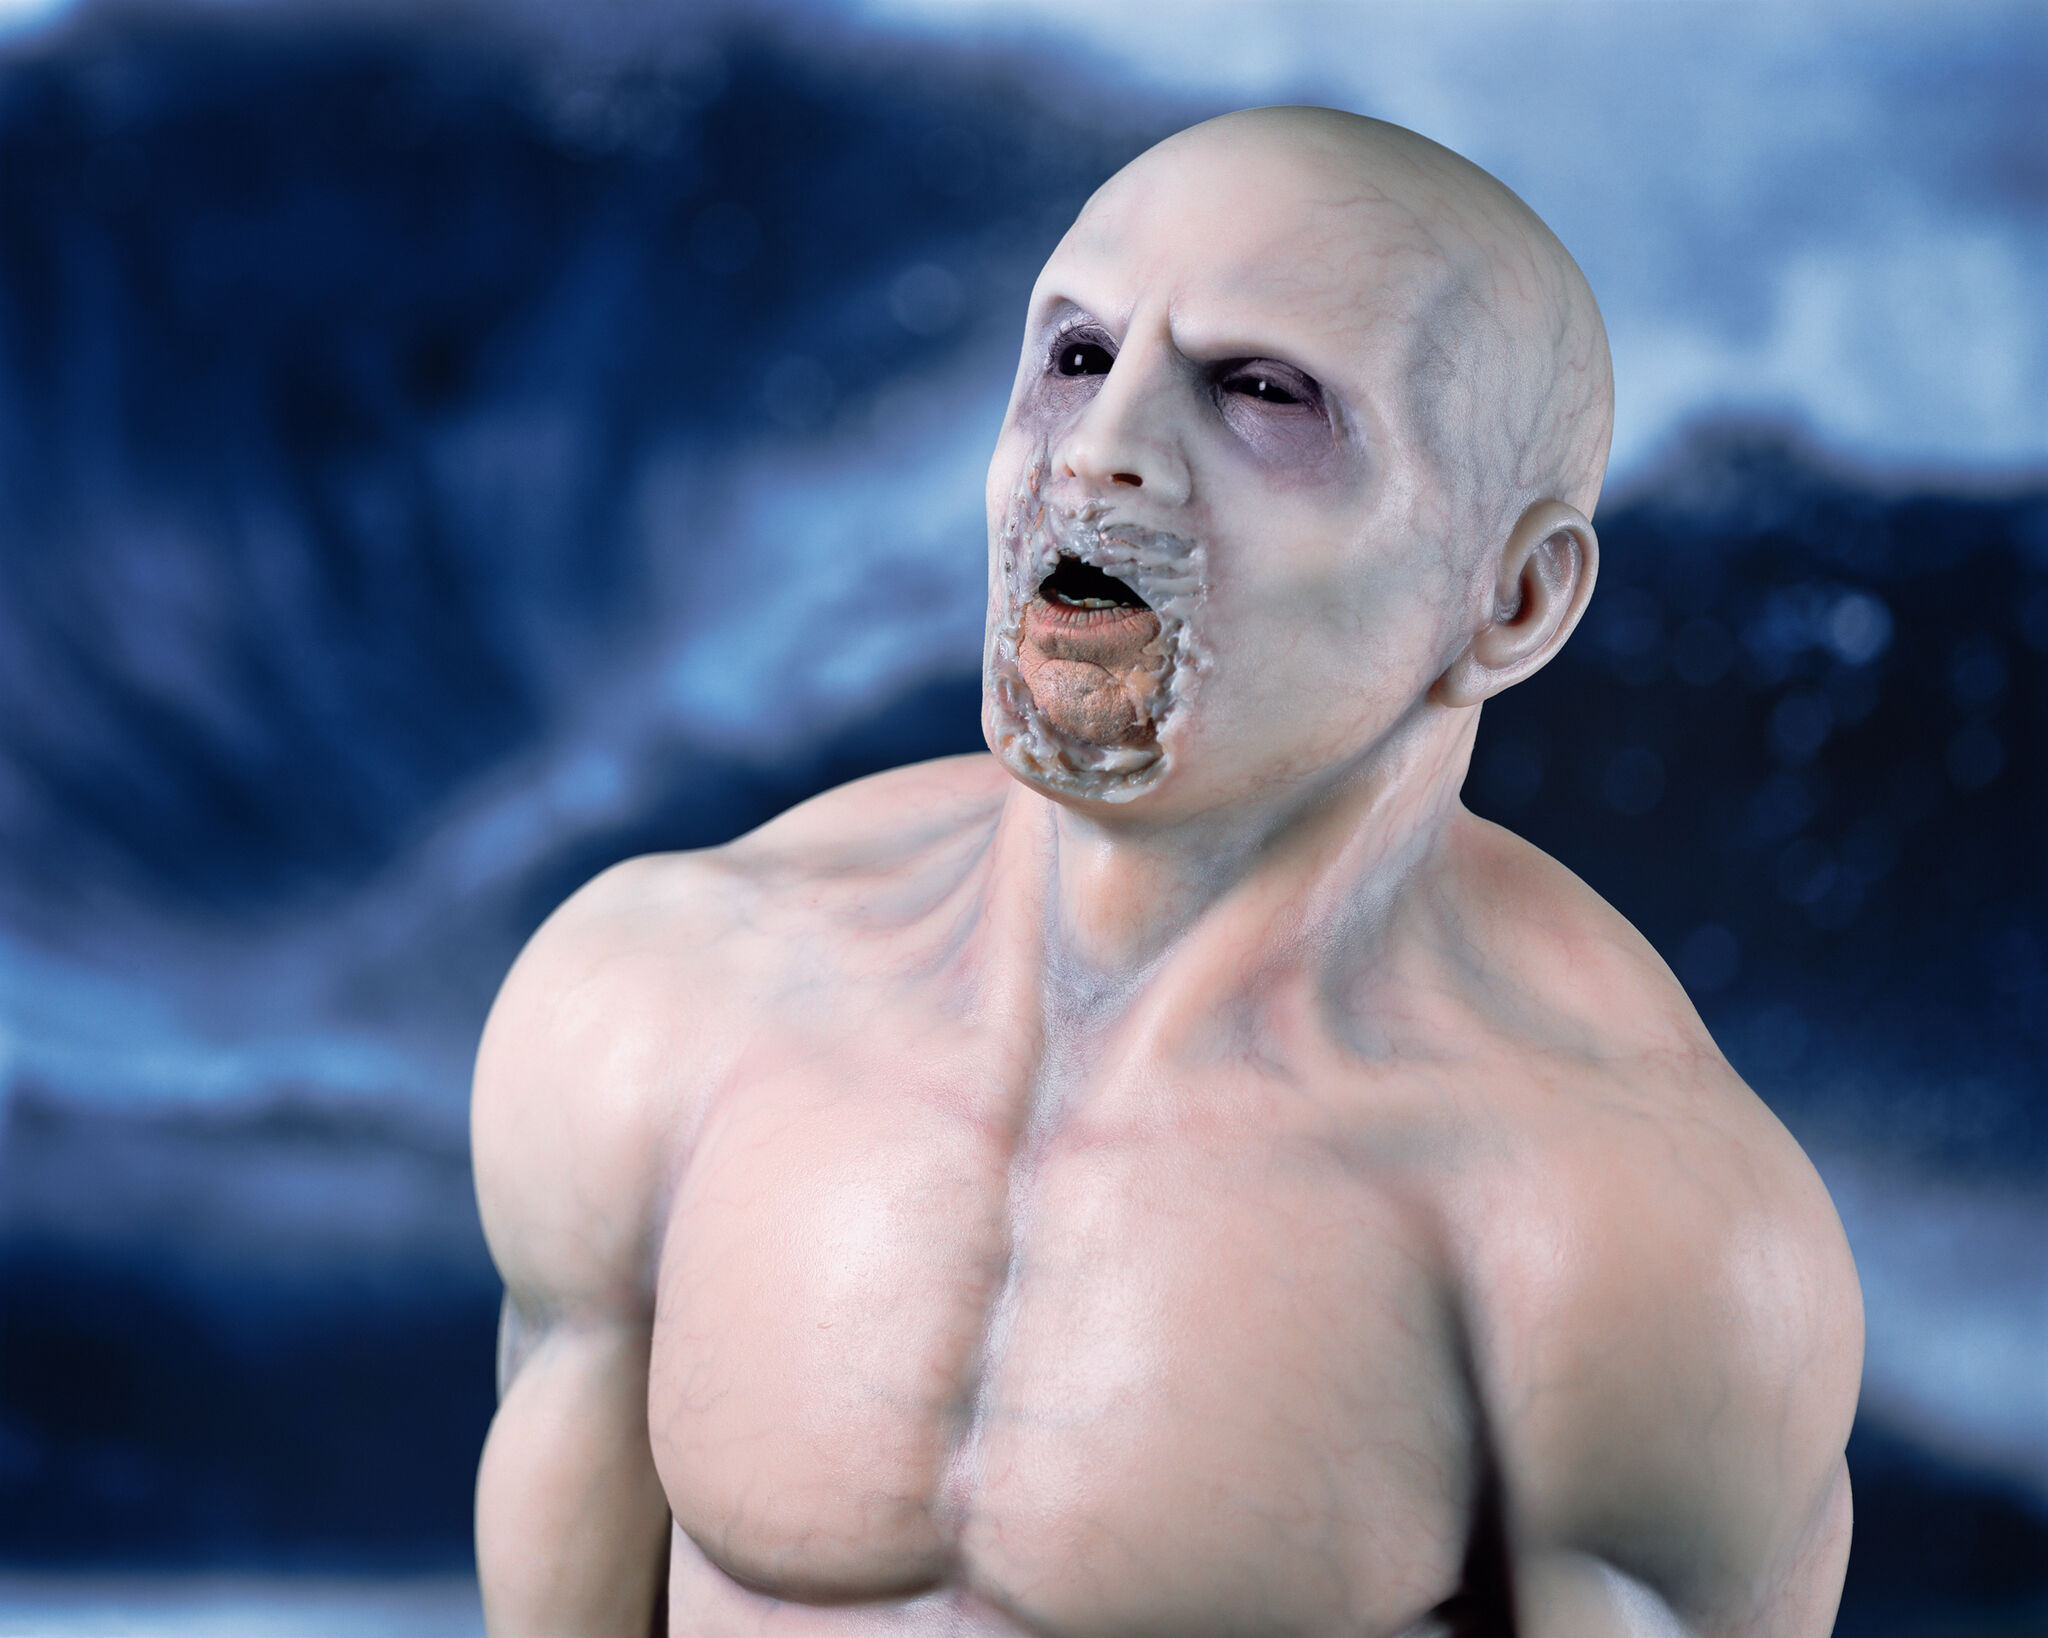 A shirtless, bald, muscular, humanoid figure with black eyes and a disfigured, marled mouth, with blue veins showing through the skin.